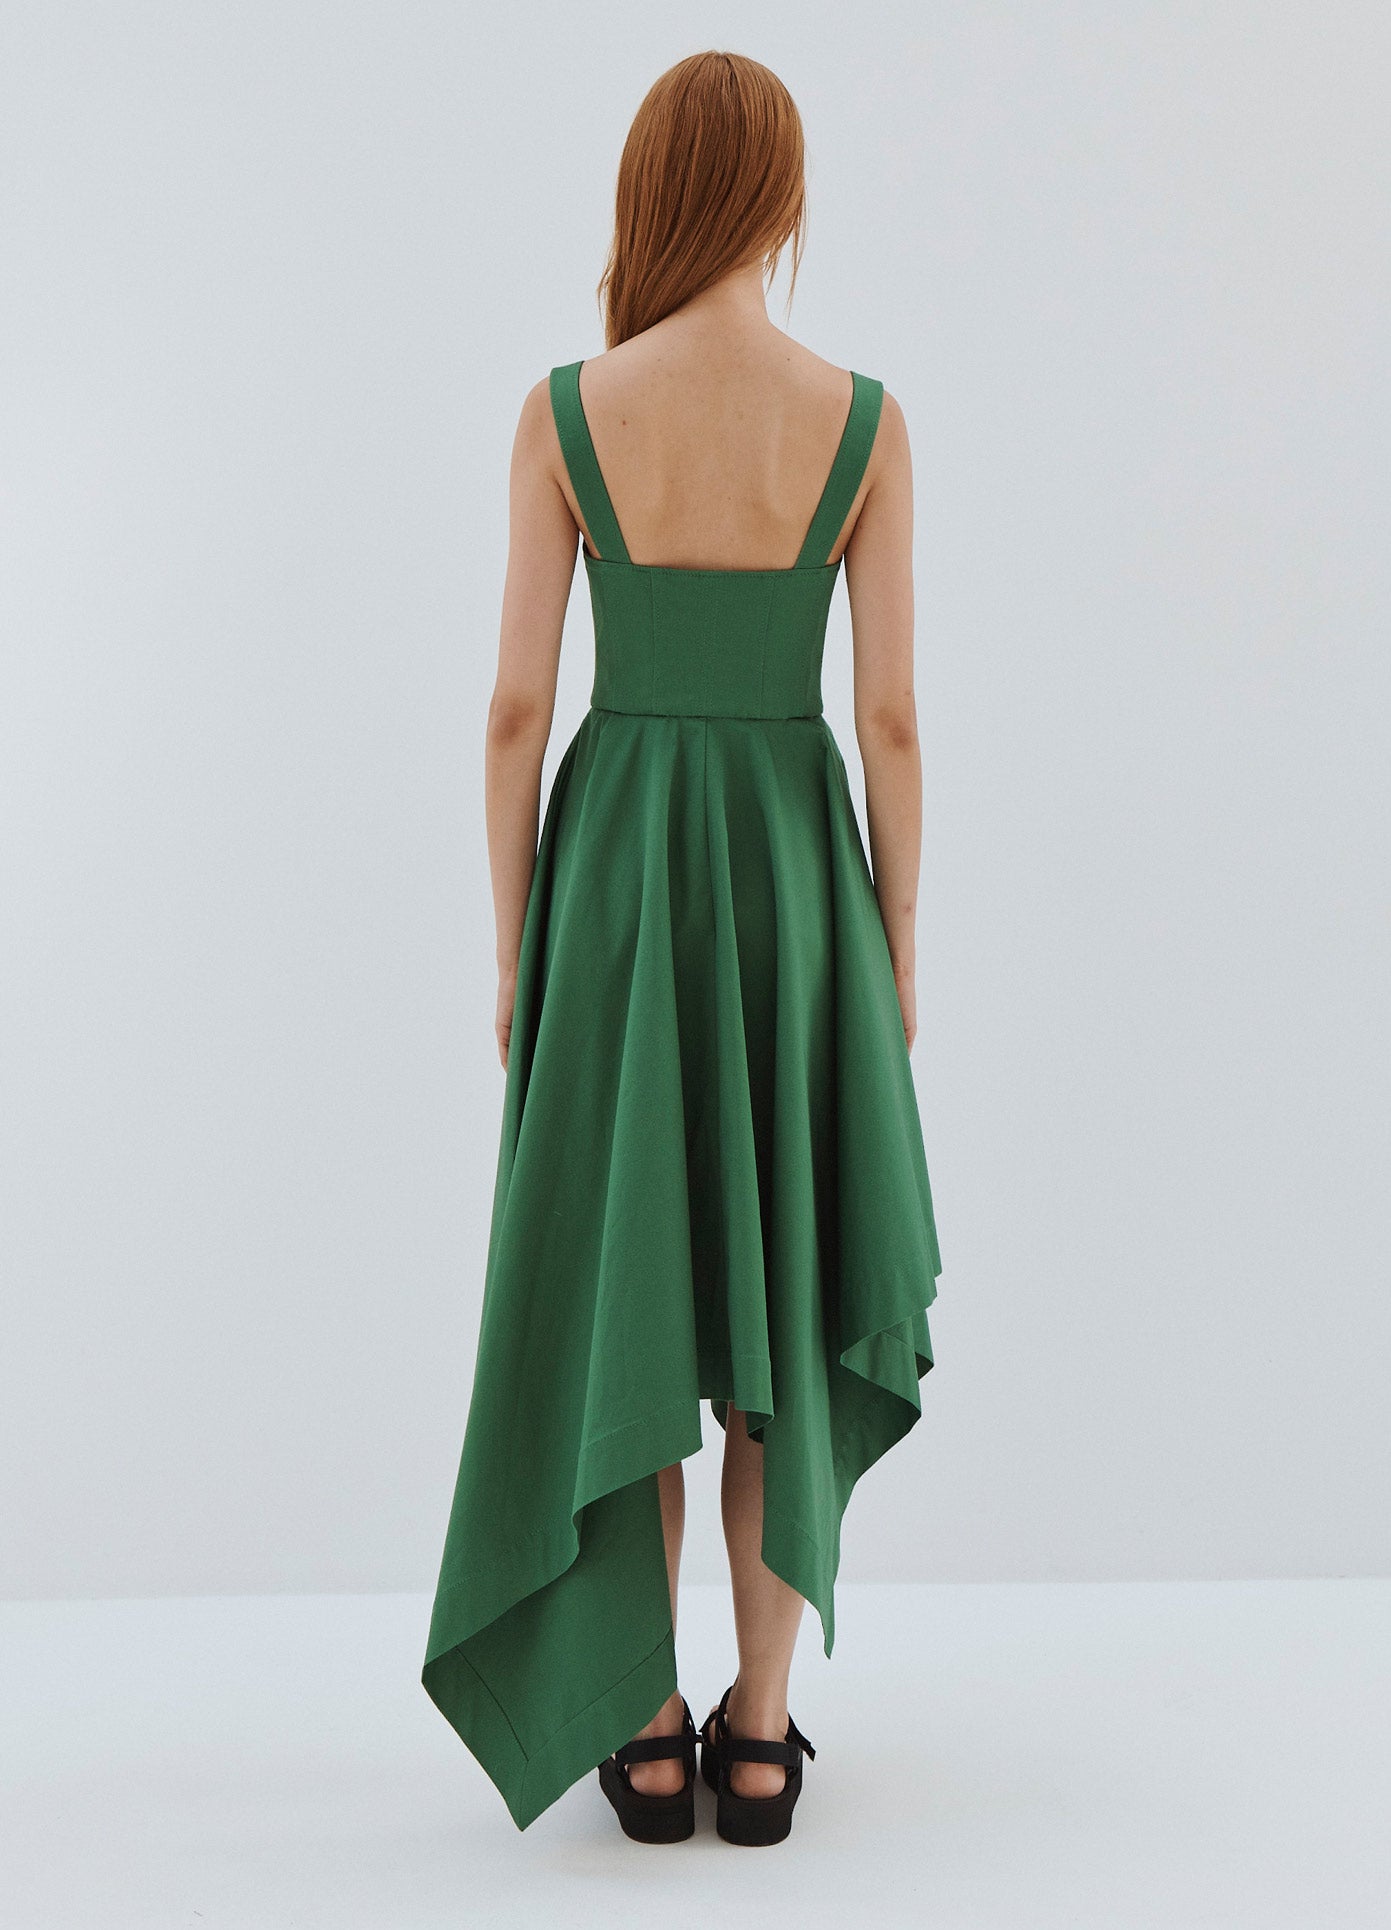 MONSE Laced Front Sleeveless Dress in Green on Model Full Back View